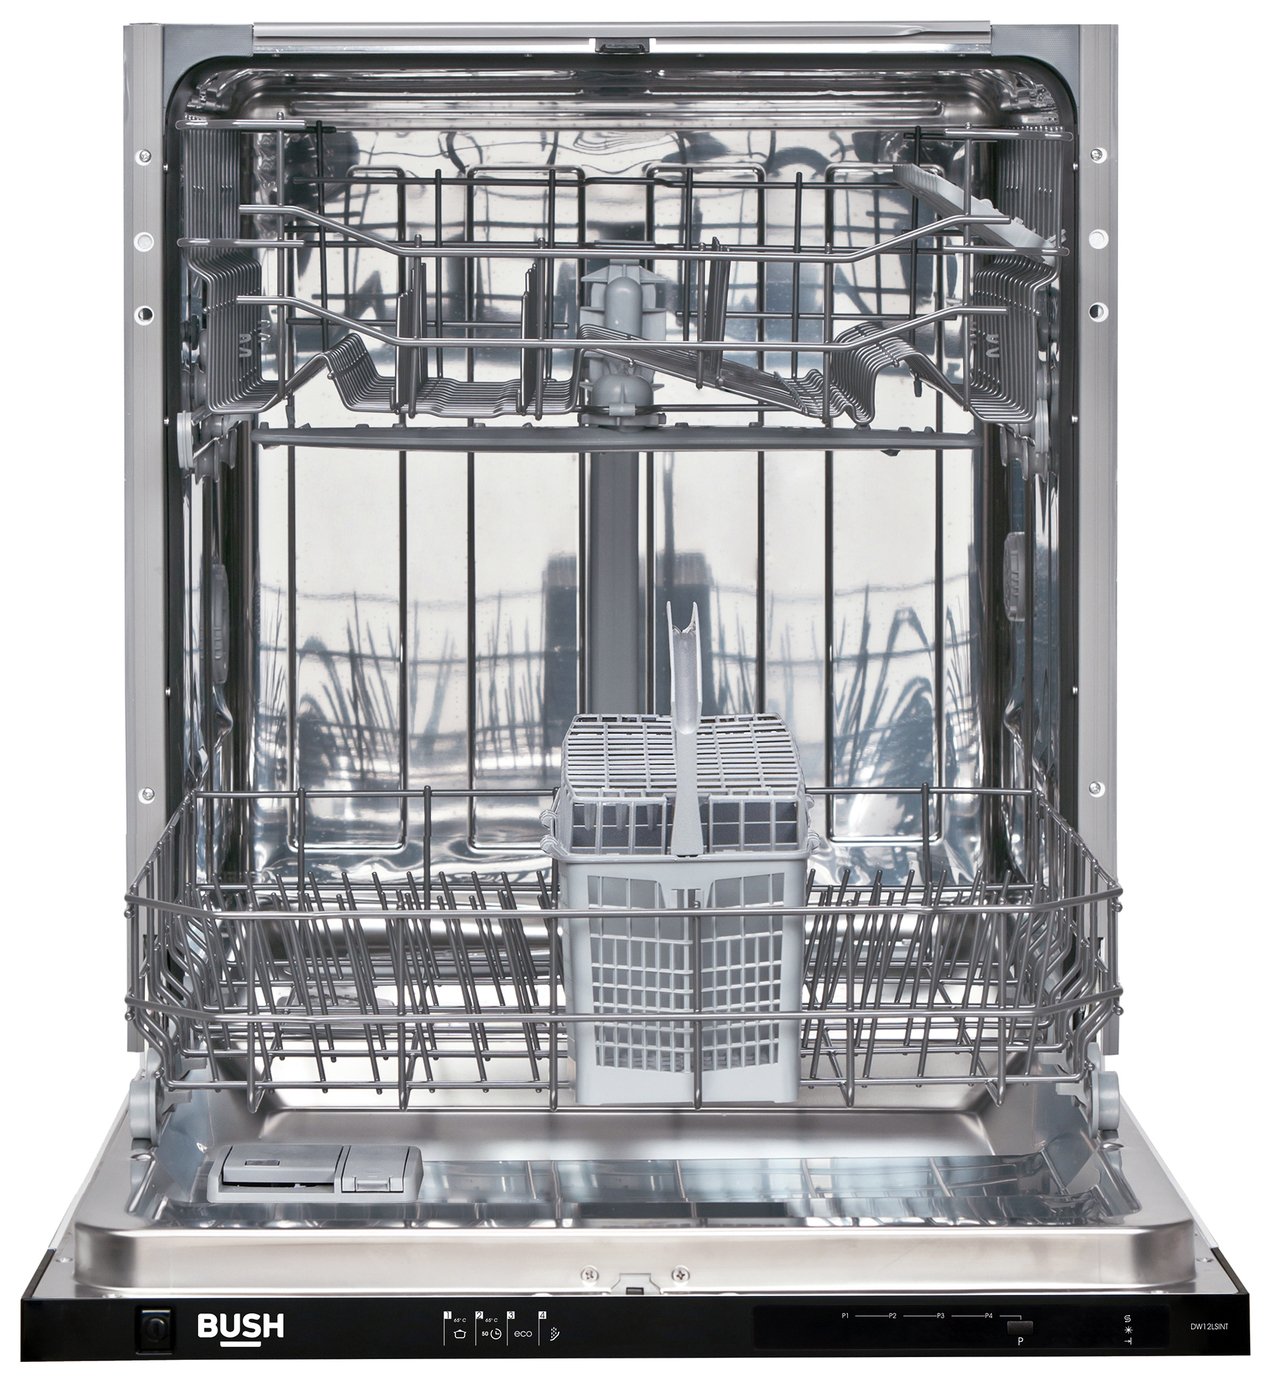 Bush DW12LSINT Full Size Integrated Dishwasher review